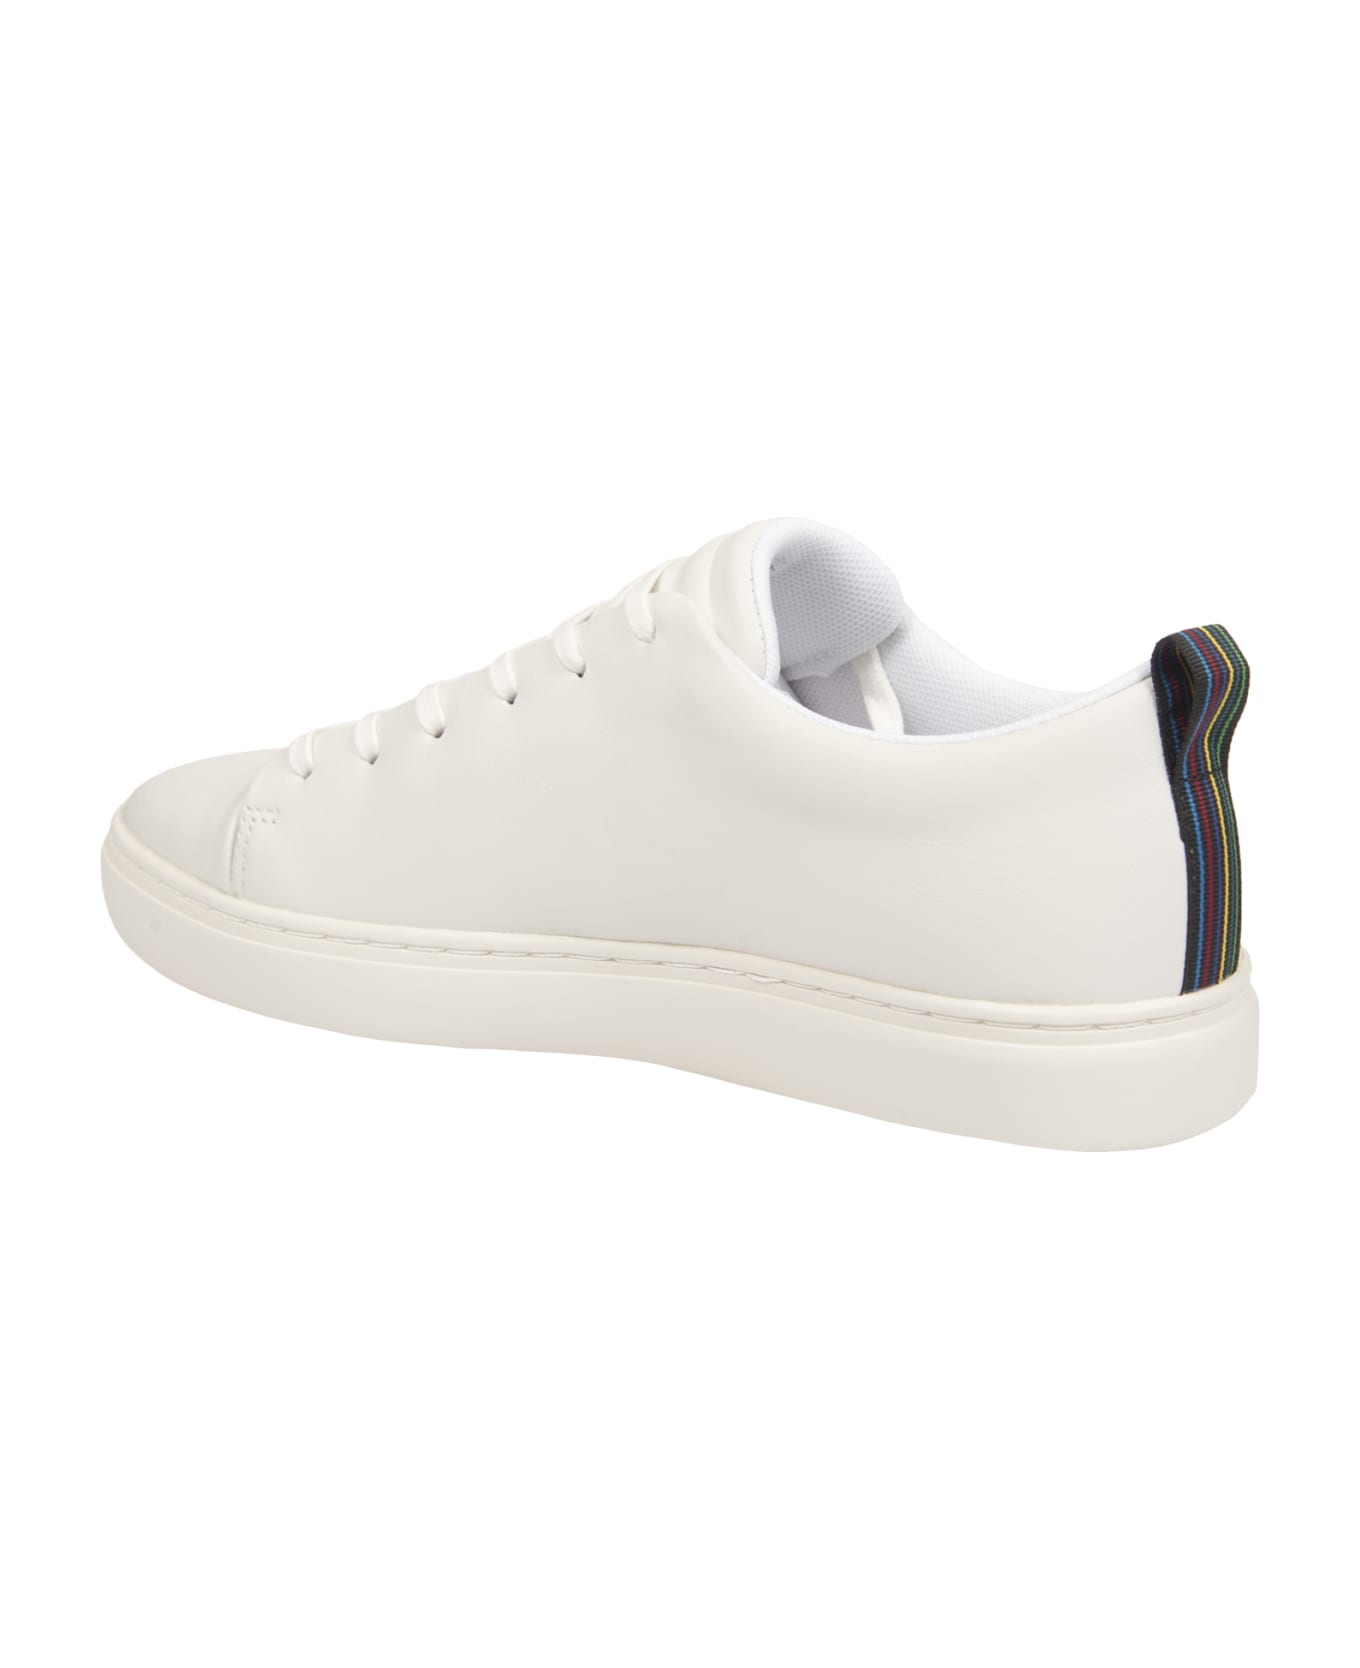 Paul Smith Lee Sneakers - White スニーカー